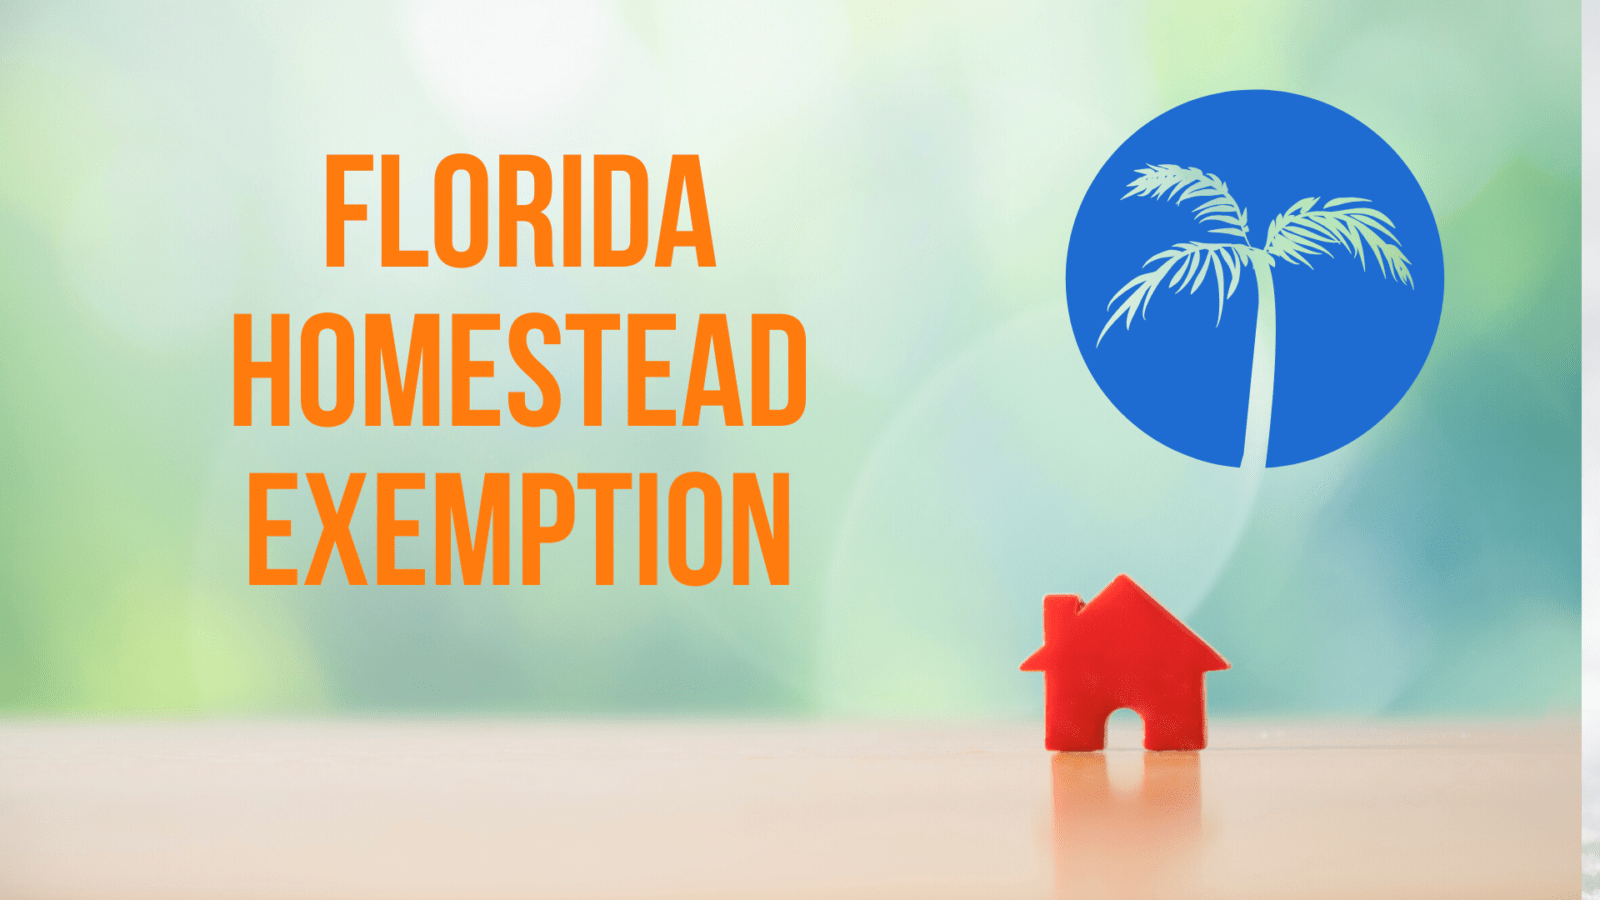 How To Qualify For The Florida Homestead Exemption